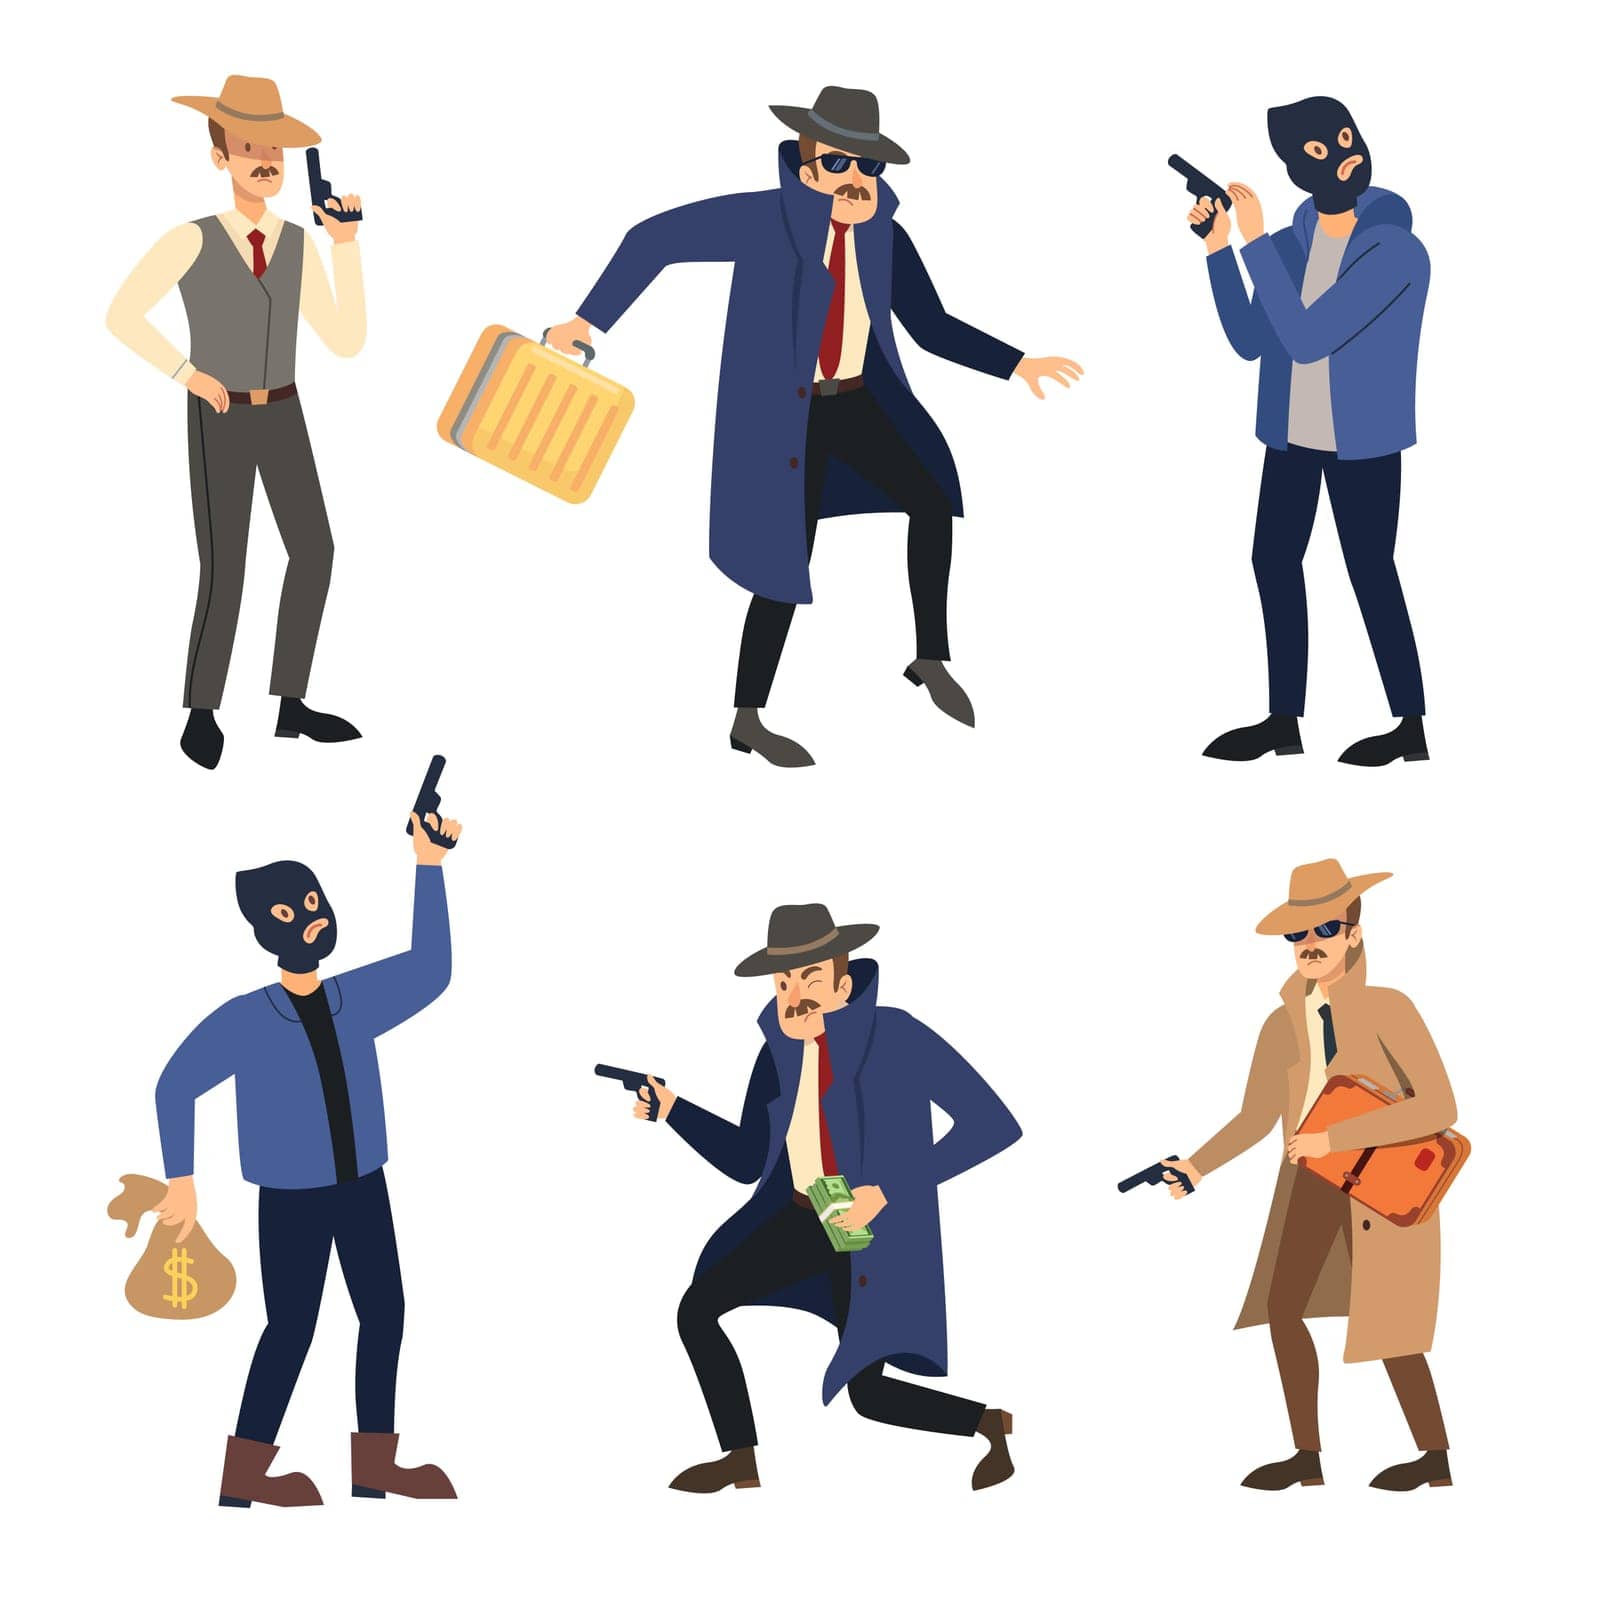 Gangster characters set. Vector illustrations of comic criminals with hat or black mask. Cartoon mafia boss with money suitcase, bandit killer with pistol isolated on white. Crime, robbery concept